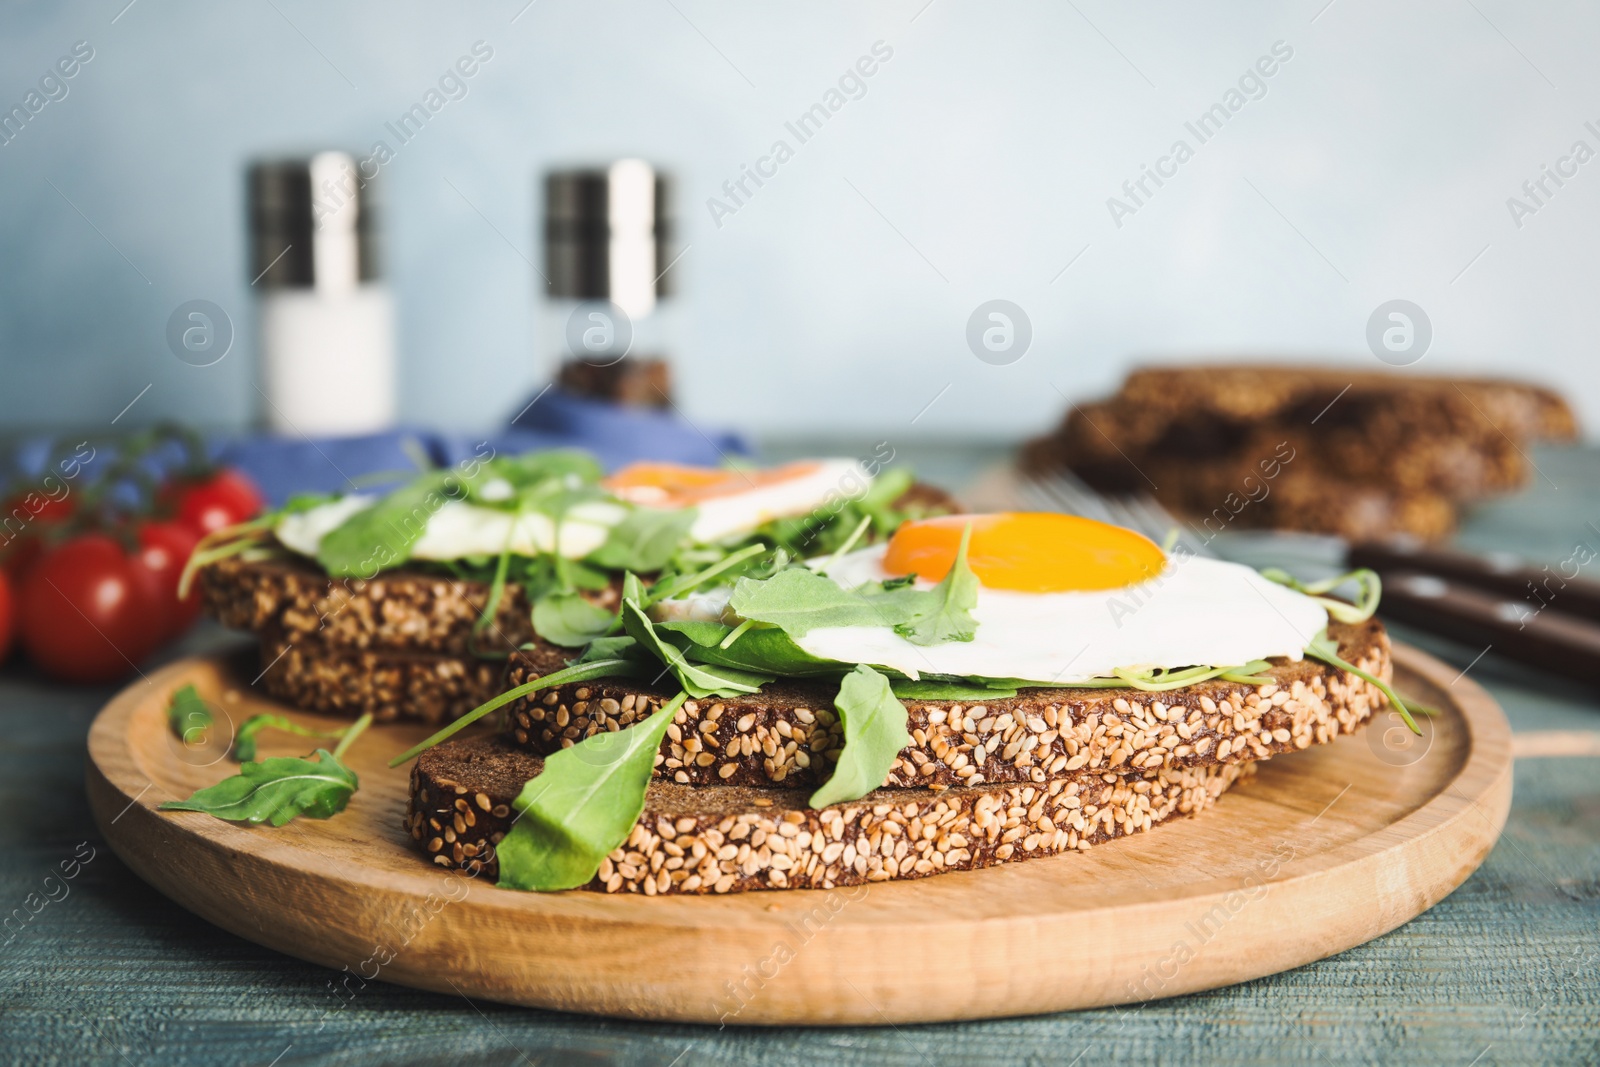 Photo of Delicious sandwiches with arugula and fried egg on blue wooden table